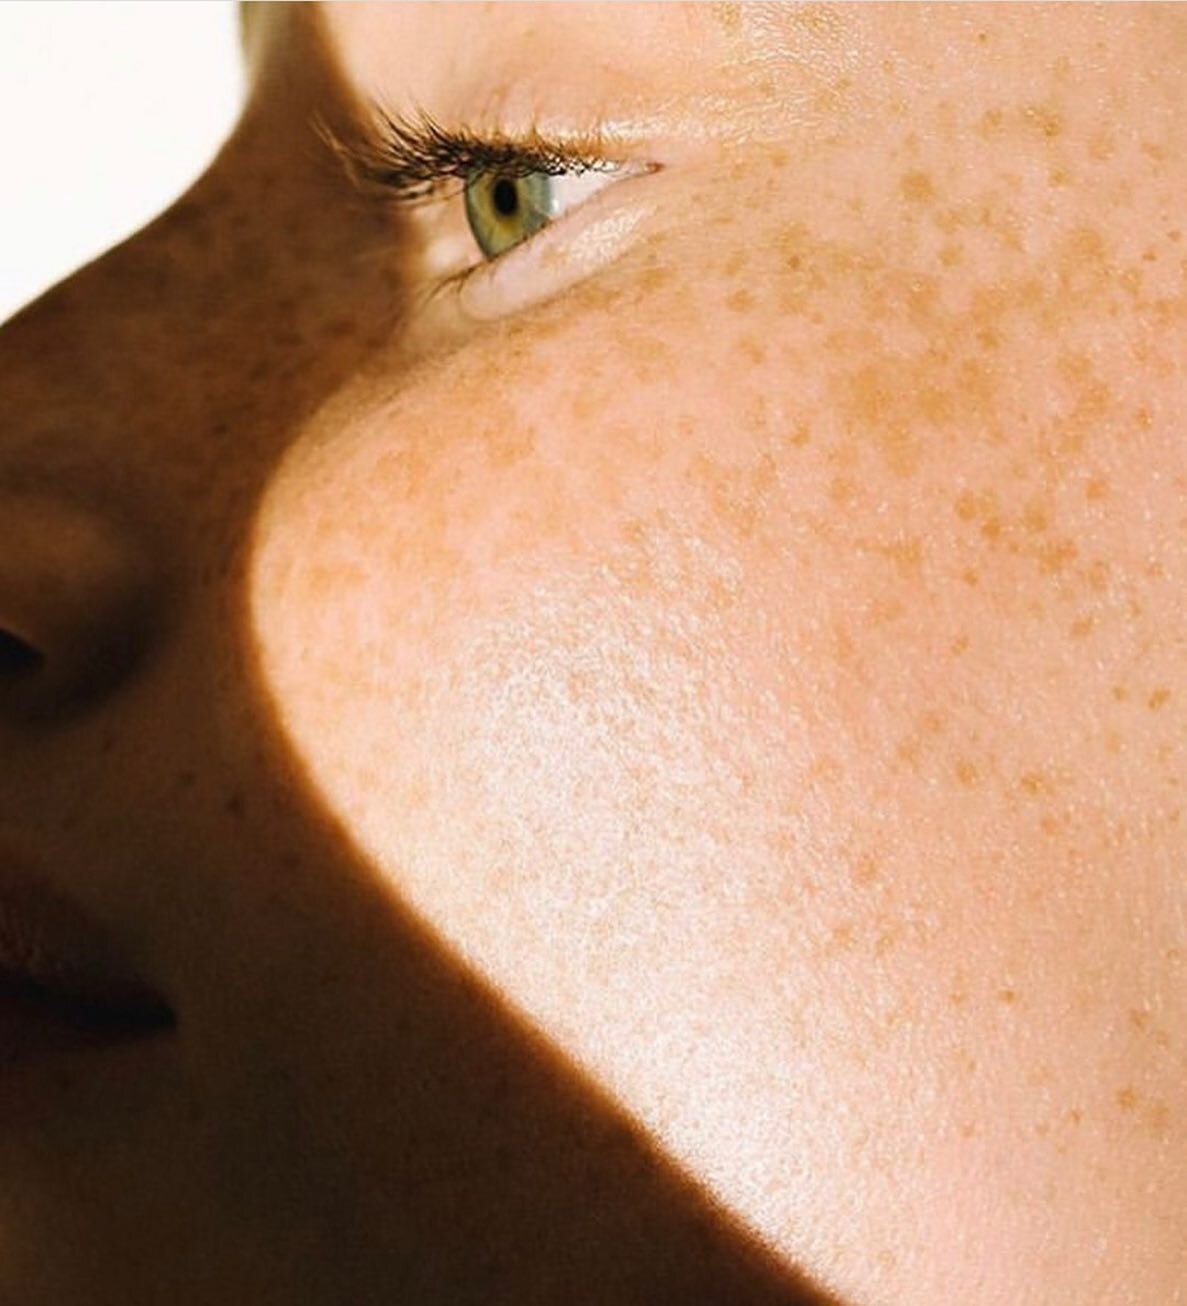 Skin Needling⚡️

Did you know Micro-needling achieves similar results to fractional laser! But - without the side effects or downtime 💁🏻&zwj;♀️ and it can even be used in delicate or hard-to-reach areas around the eyes, eyelids, lips, neck, nose an